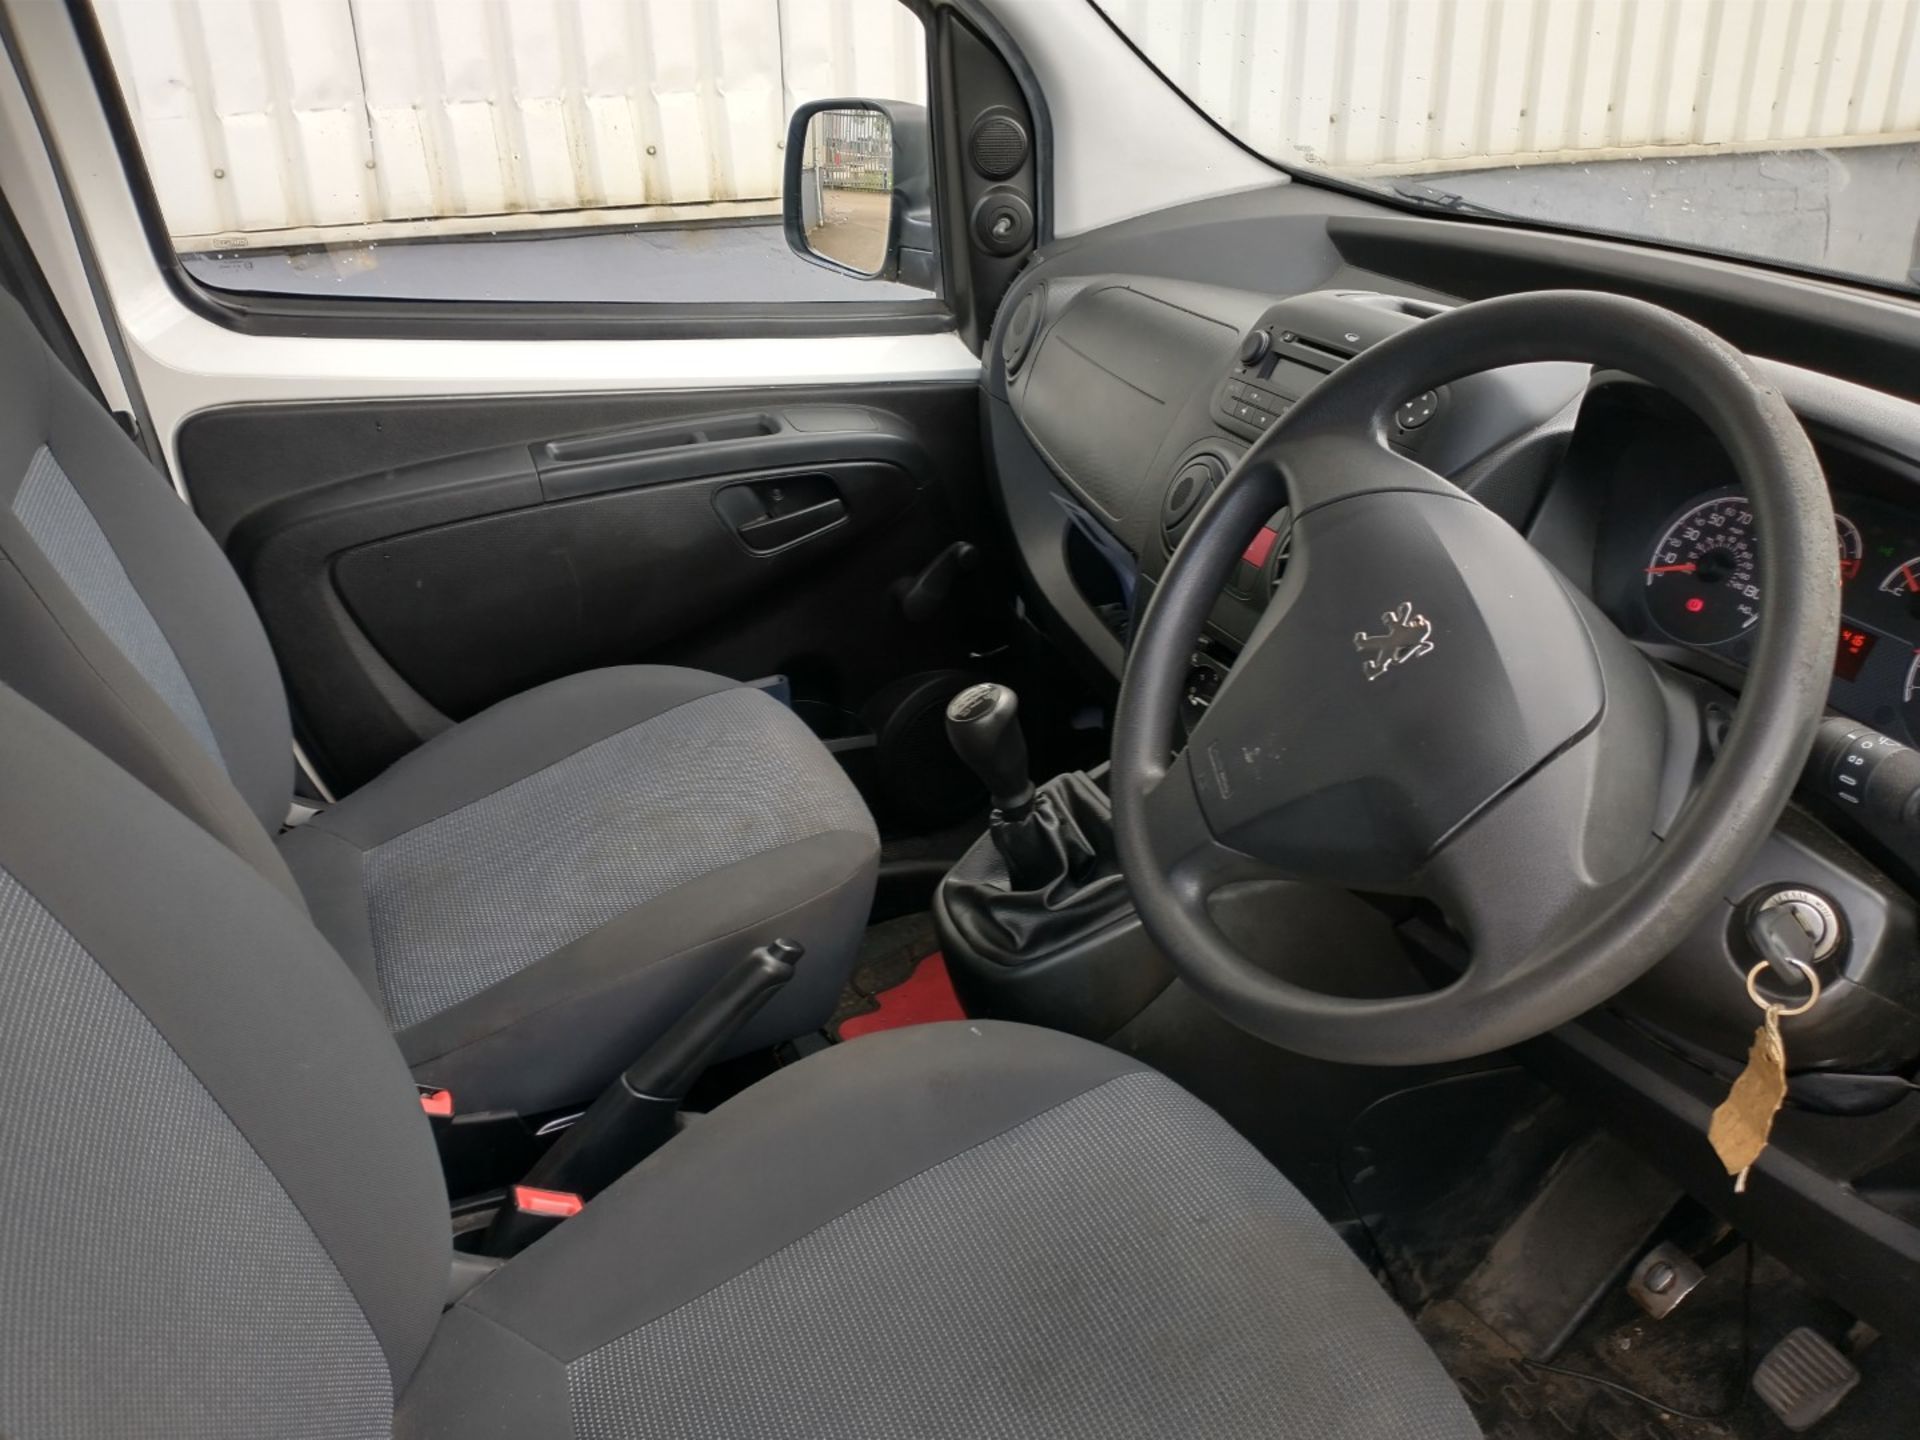 2016 Peugeot Bipper S Hdi Panel van - CL505 - Location: Corby - Image 8 of 15